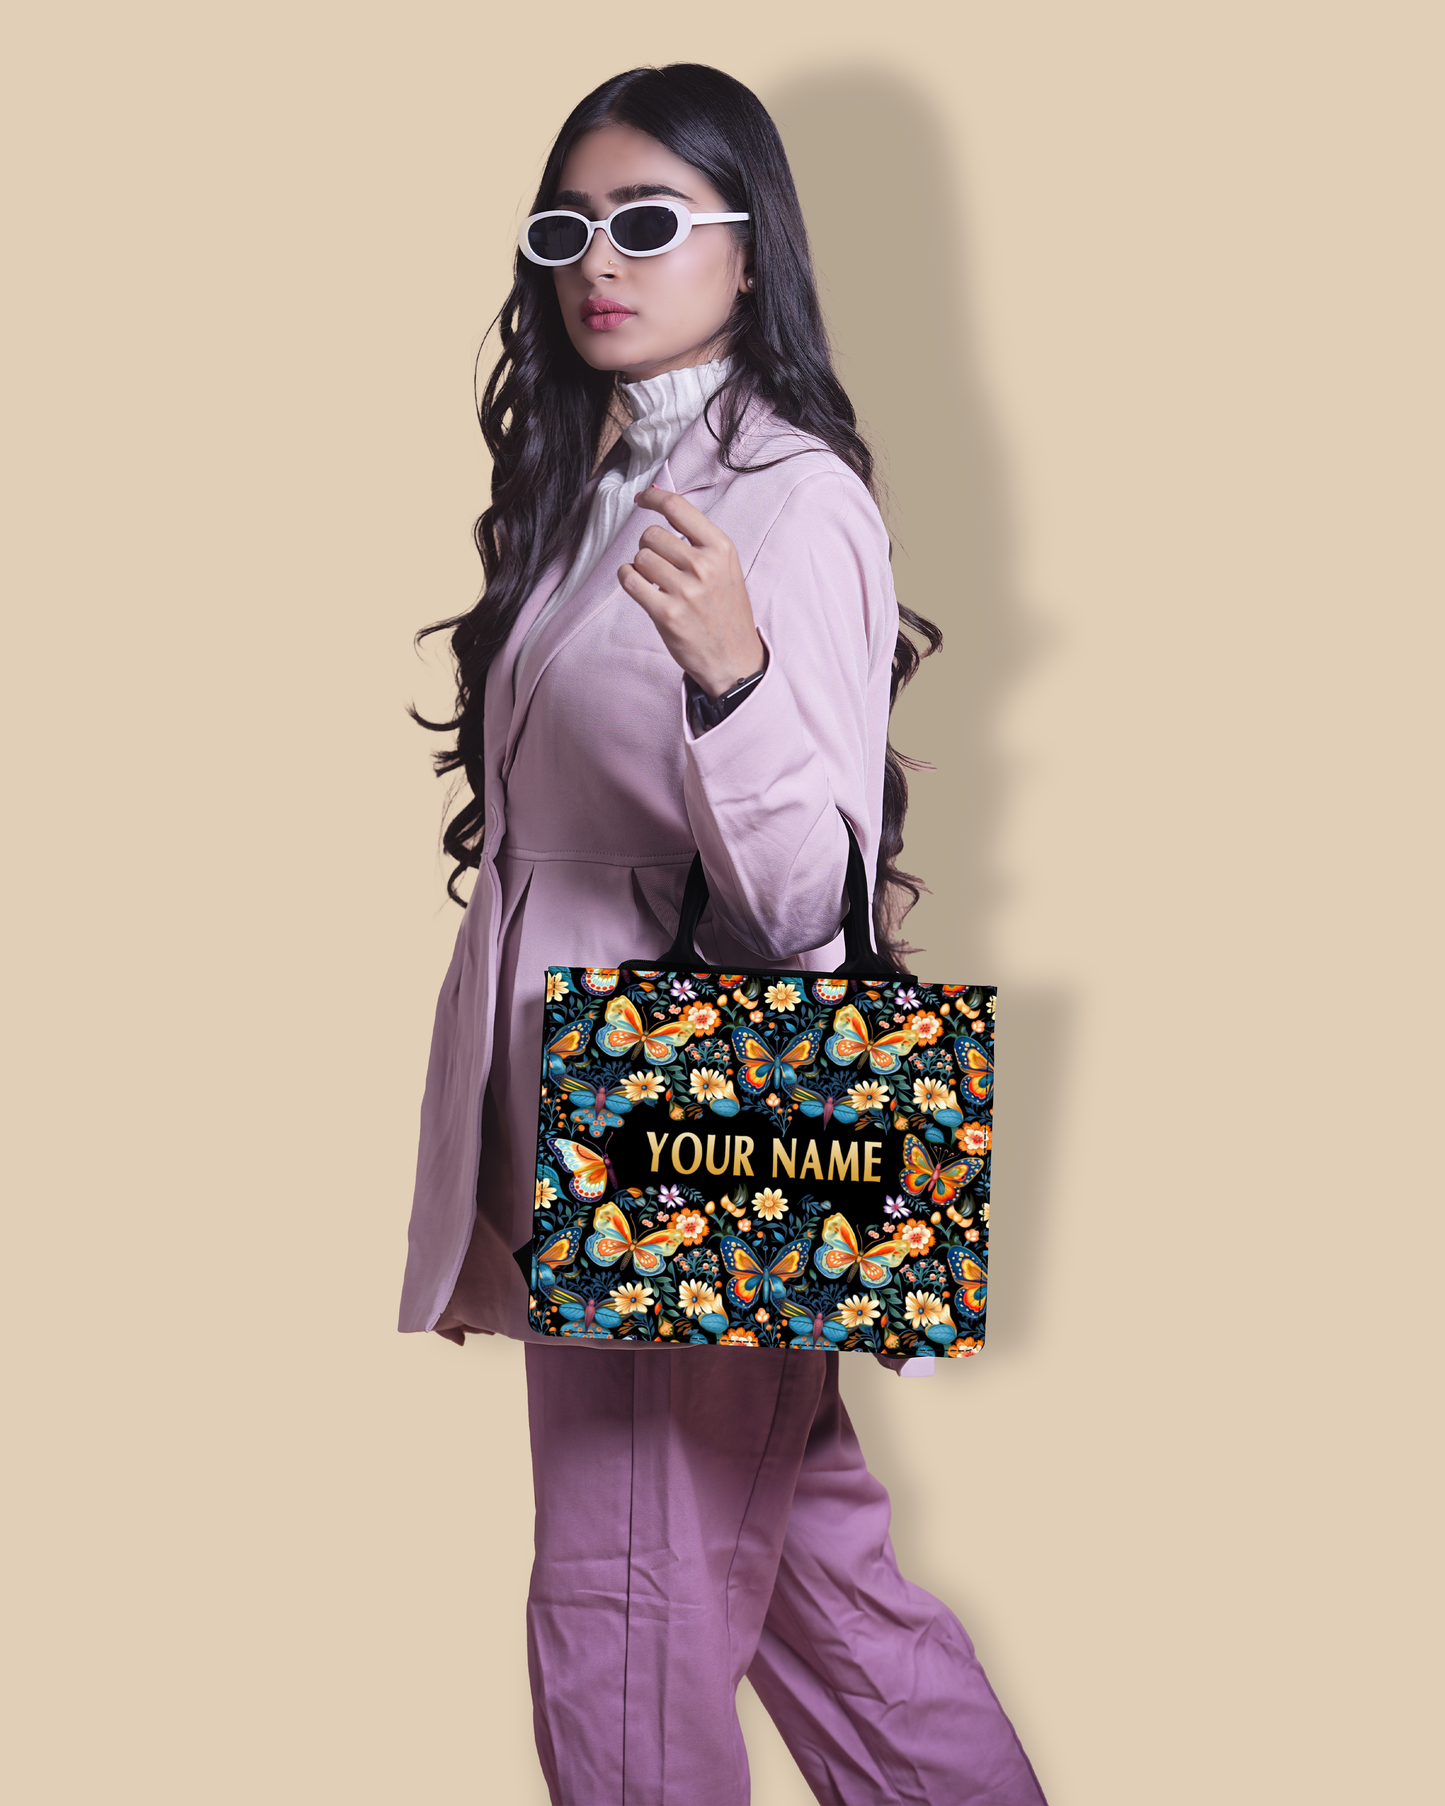 Customized small Tote Bag Designed With Blossom Colorful Butterflies